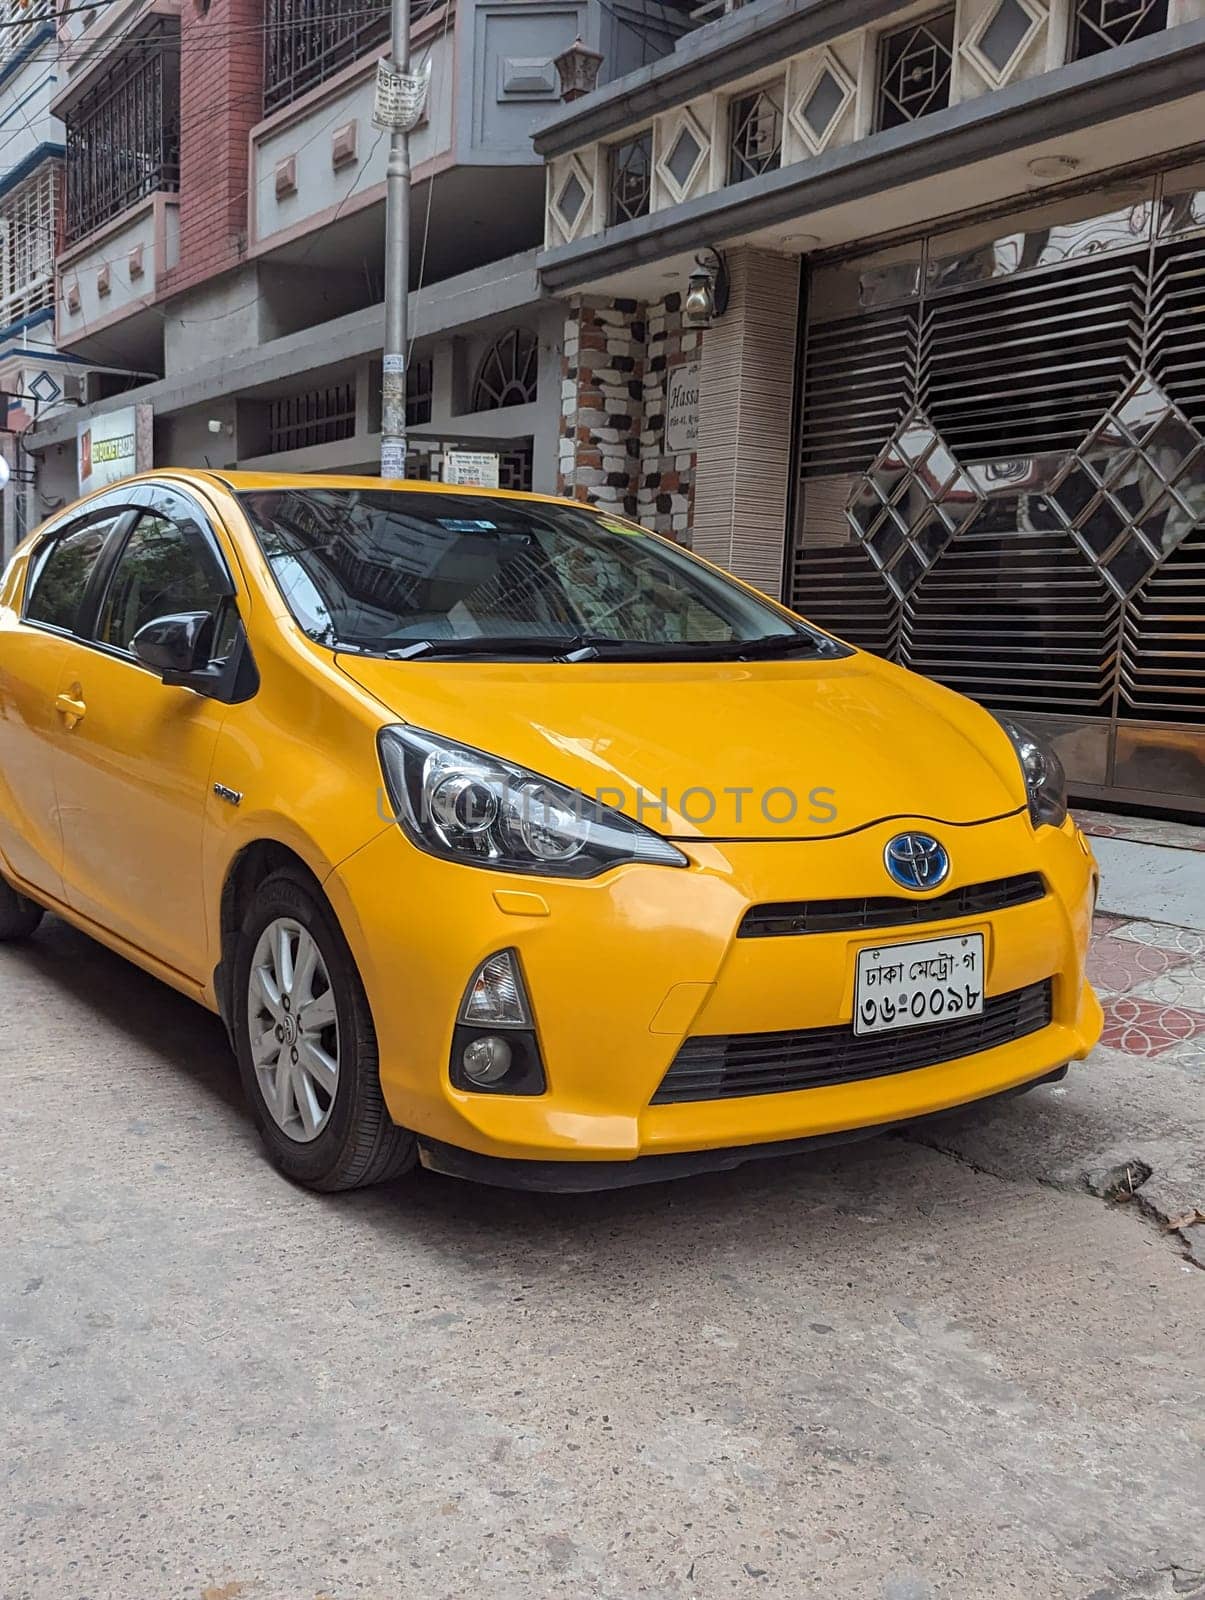 A yellow Toyota Prius C is parked on a street in Dhaka, Bangladesh. The car is facing forward and the front of the car is in focus. The car is parked on a street with a building in the background.